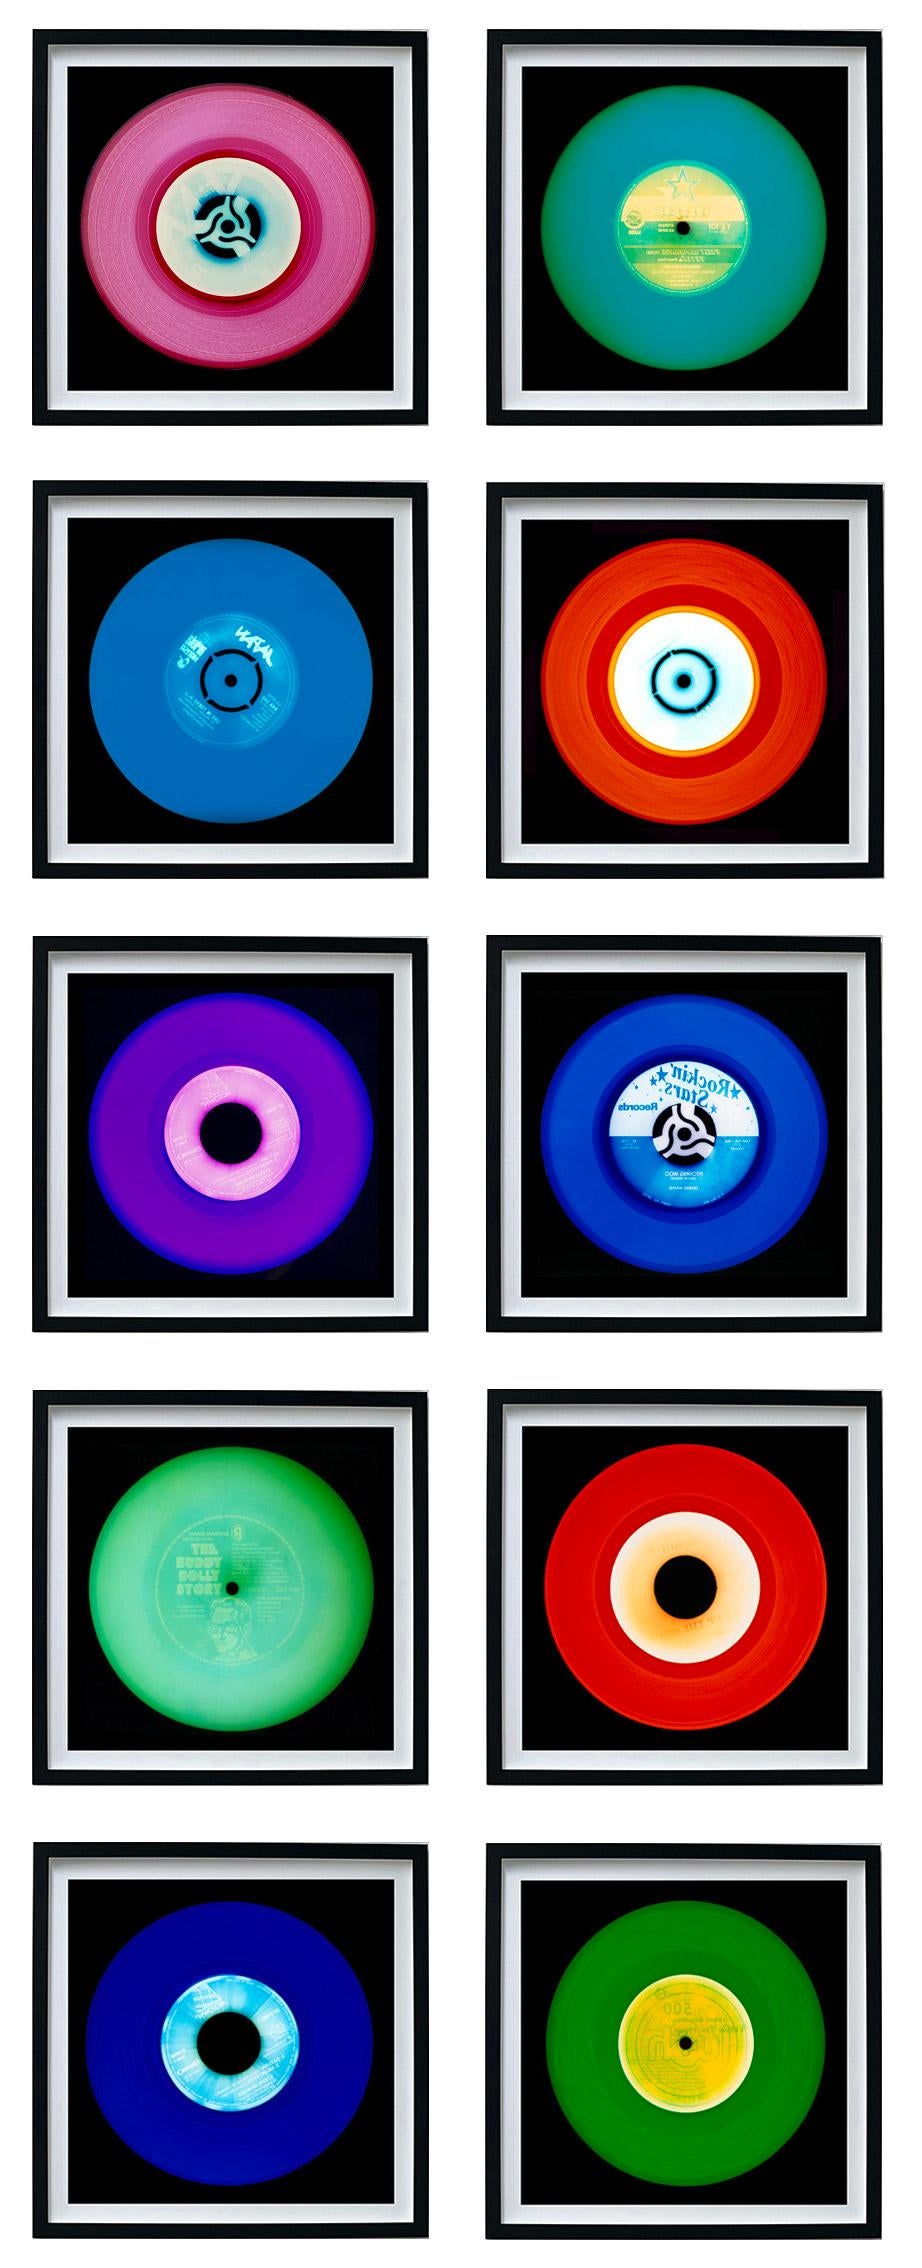 Heidler & Heeps Vinyl Collection Ten Piece Multicolor Installation.
Acclaimed contemporary photographers, Richard Heeps and Natasha Heidler have collaborated to make this beautifully mesmerising collection. A celebration of the vinyl record and